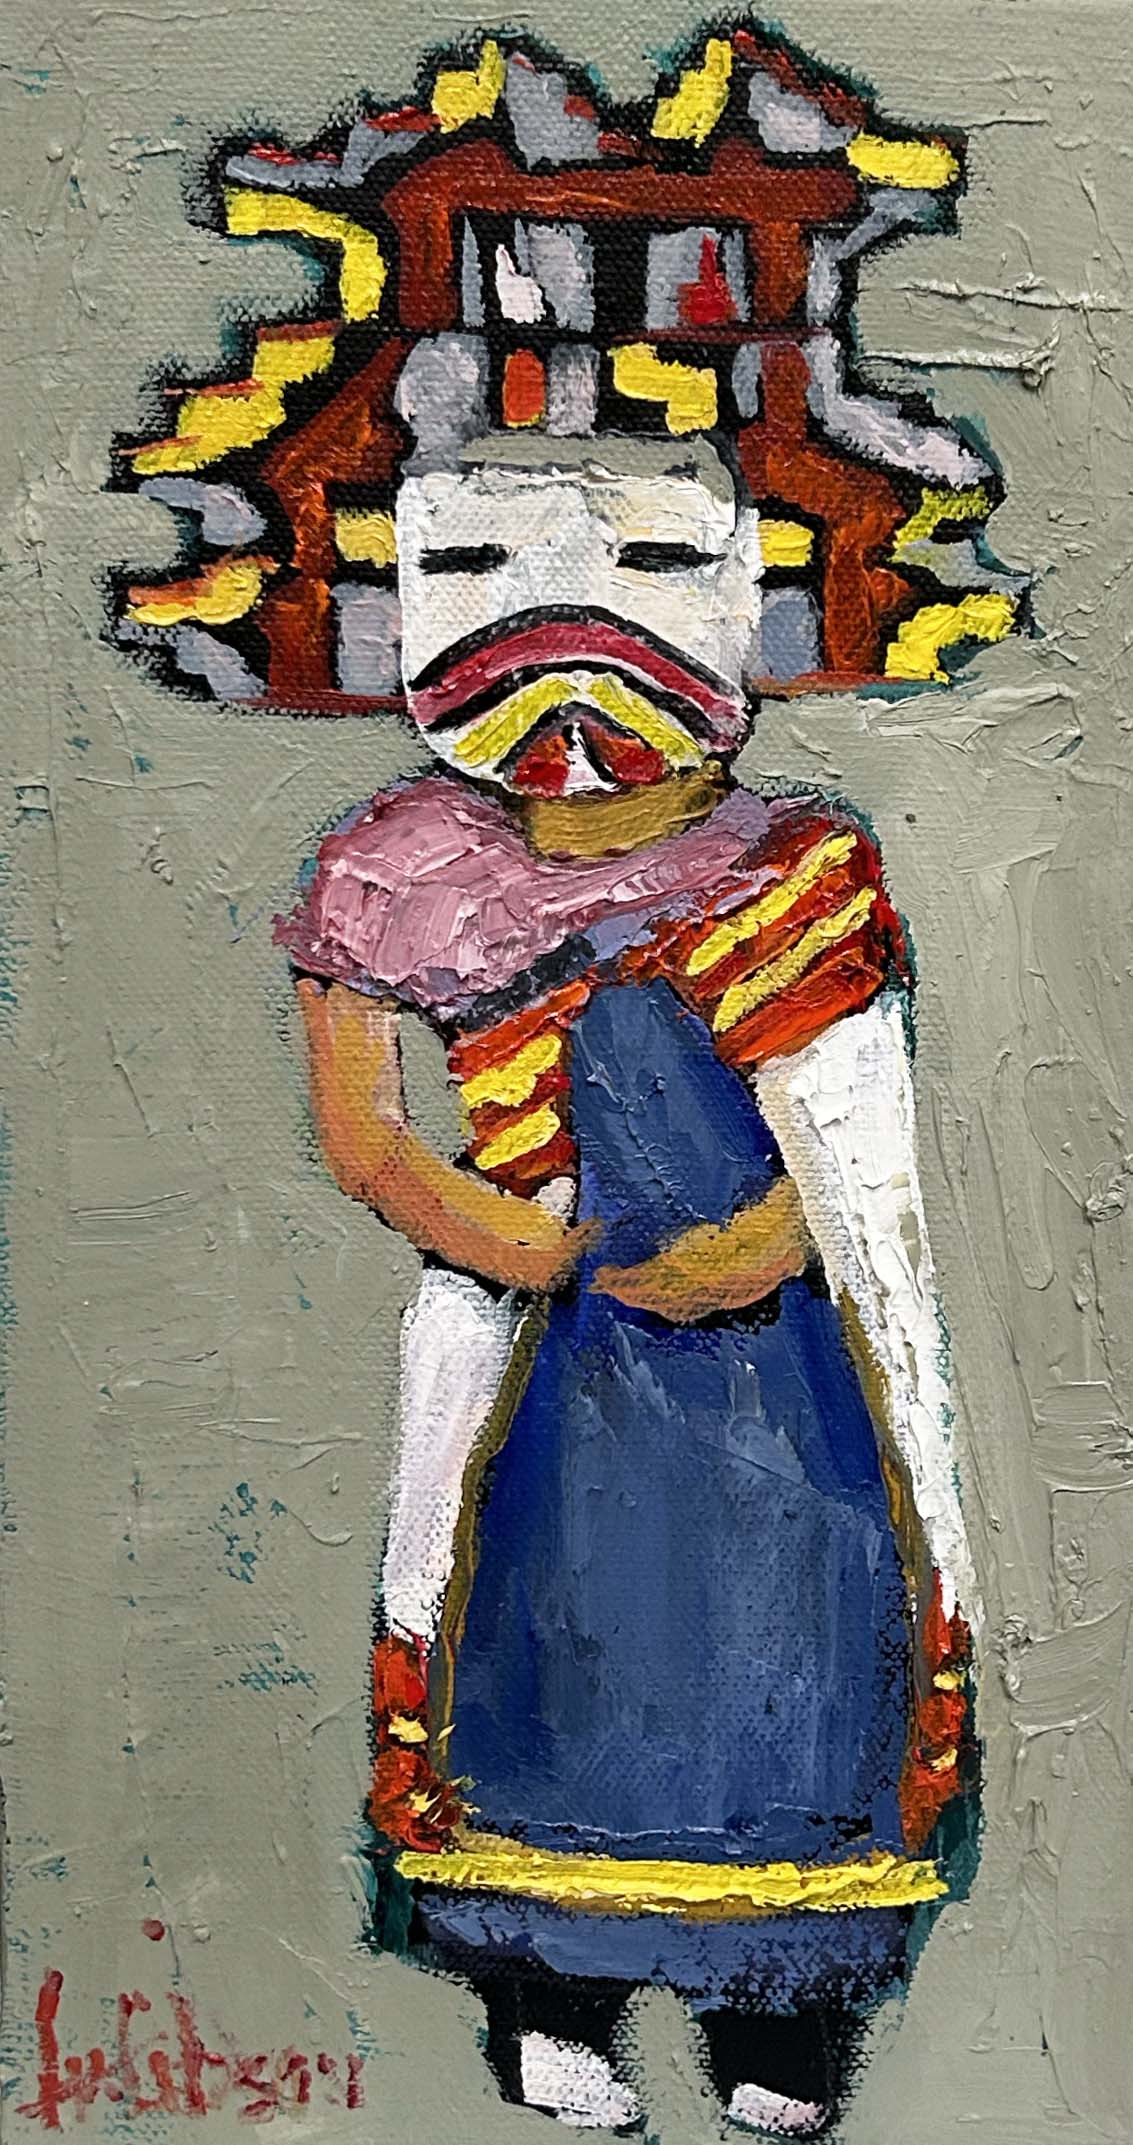 Kachina Doll with Red and Yellow Sash